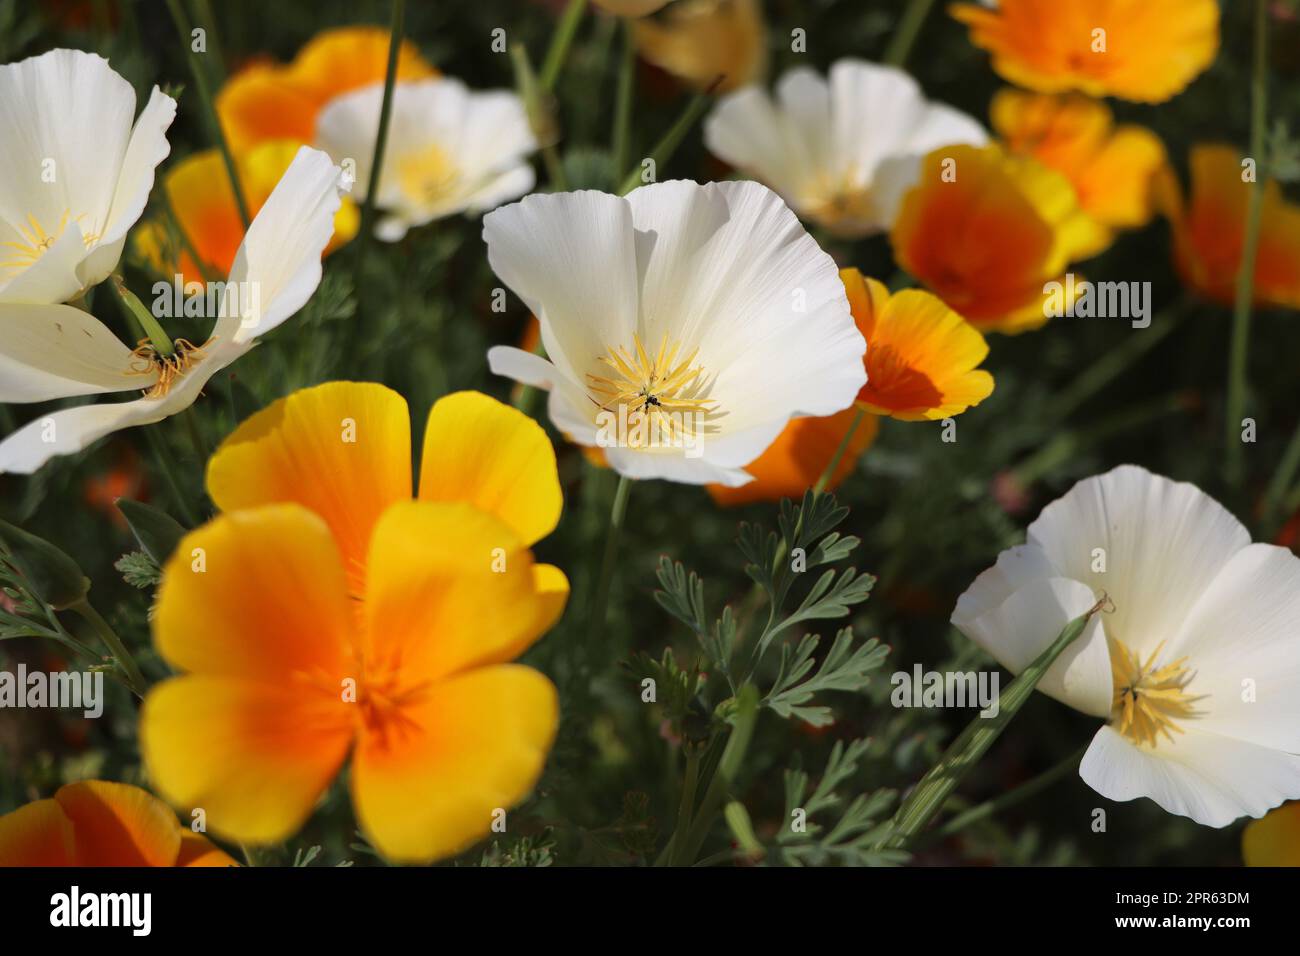 Summer backgroung. Flowers of eschscholzia californica or californian poppy, flowering plant of family papaveraceae Stock Photo